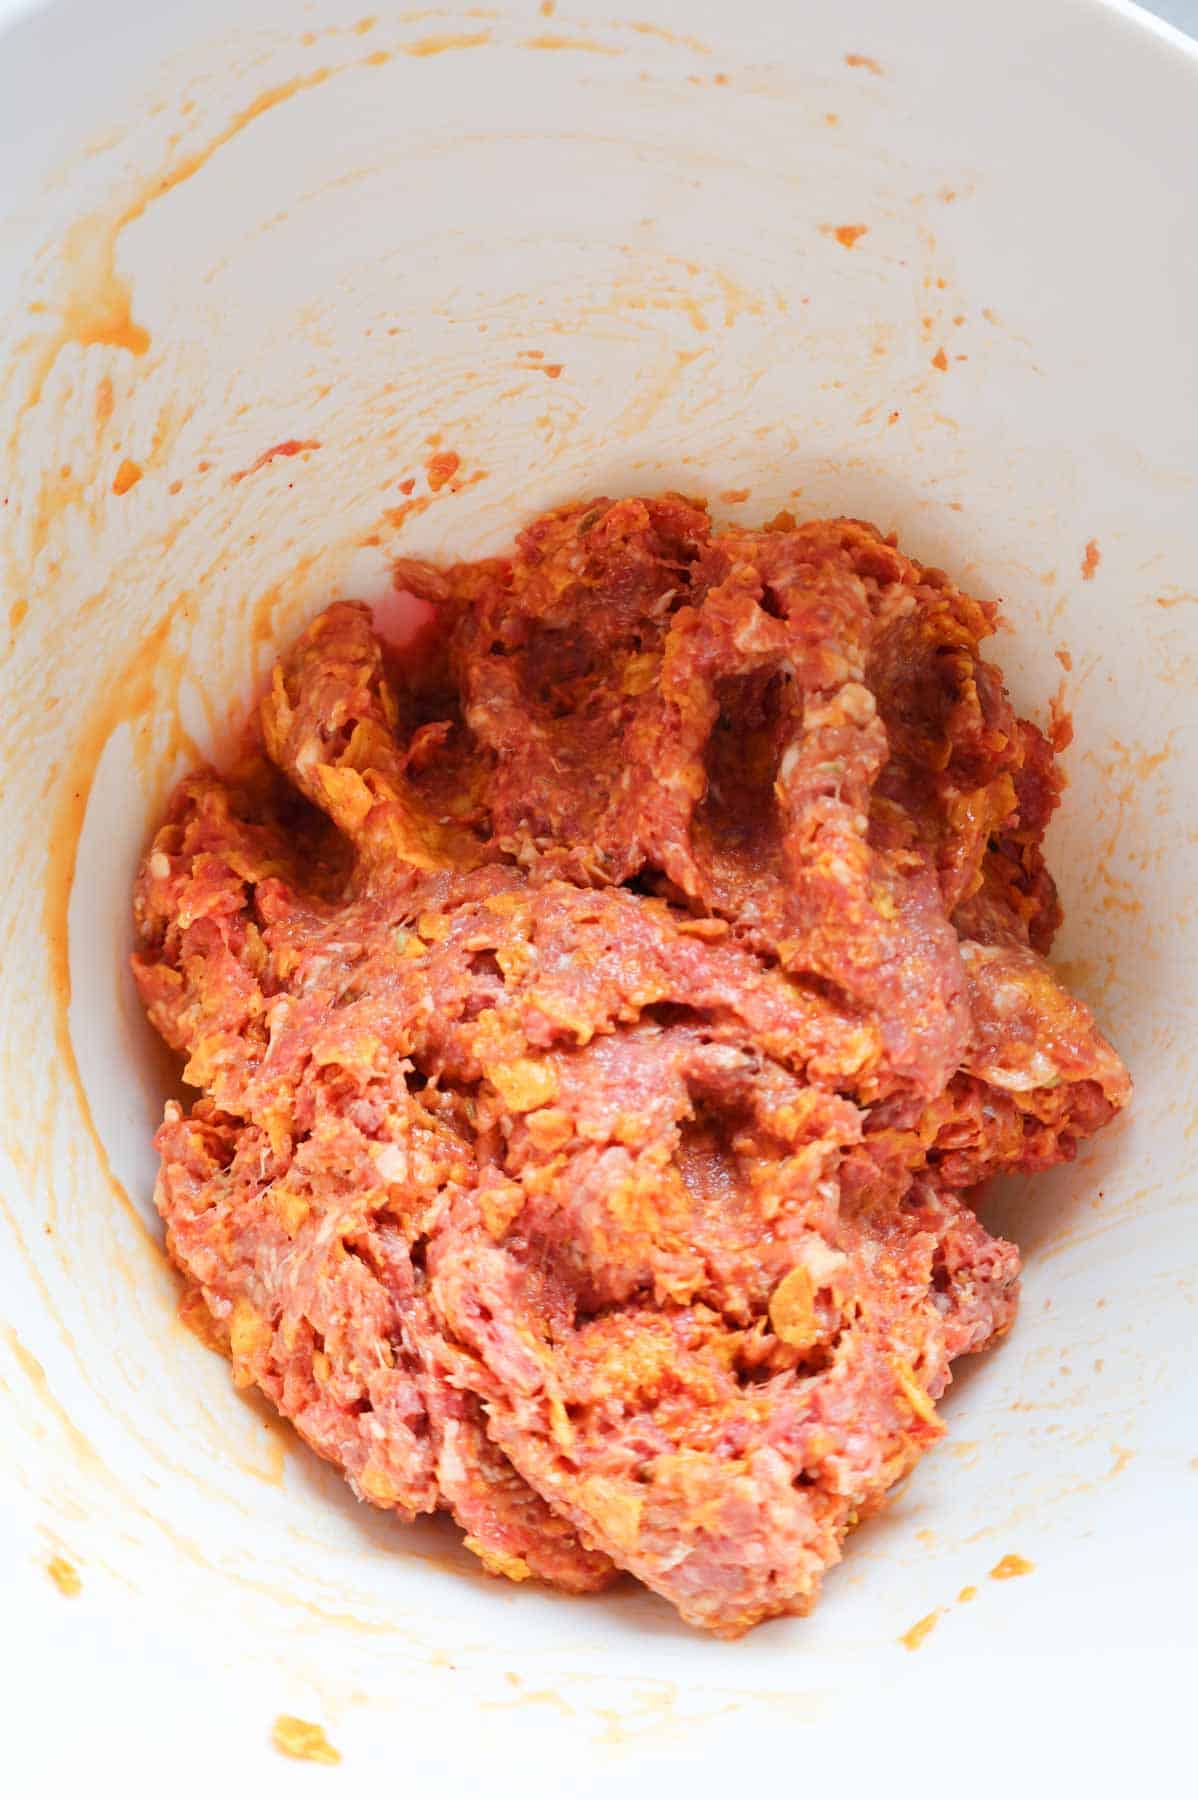 Dorito meatloaf mixture in a mixing bowl